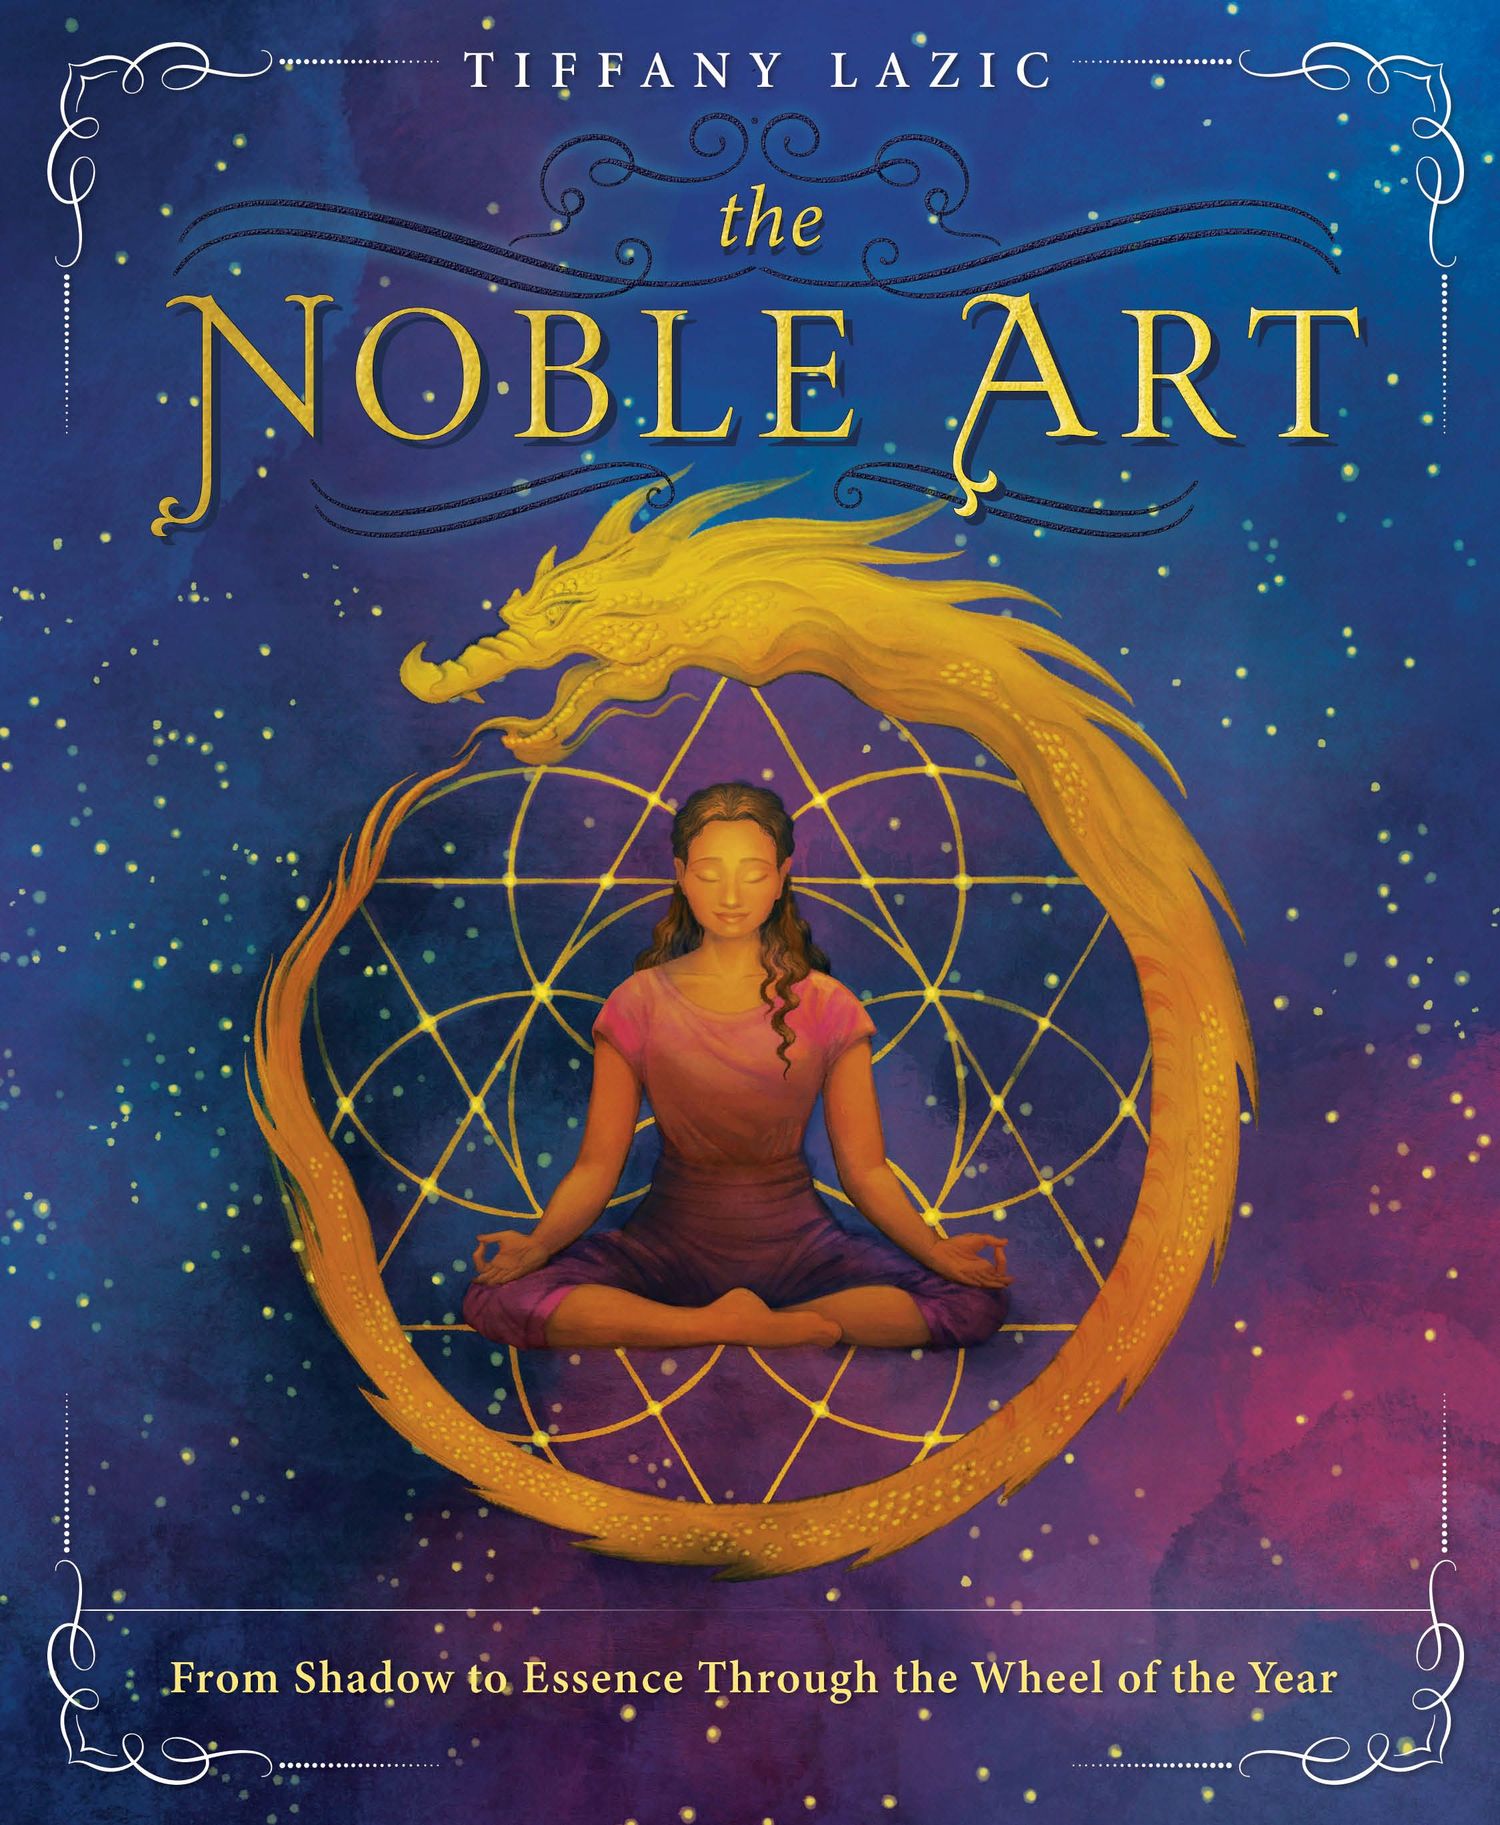 Gallery Photo of The Noble Art: From Shadow to Essence Through the Wheel of the Year by Tiffany Lazic (Llewellyn Worldwide, 2021)